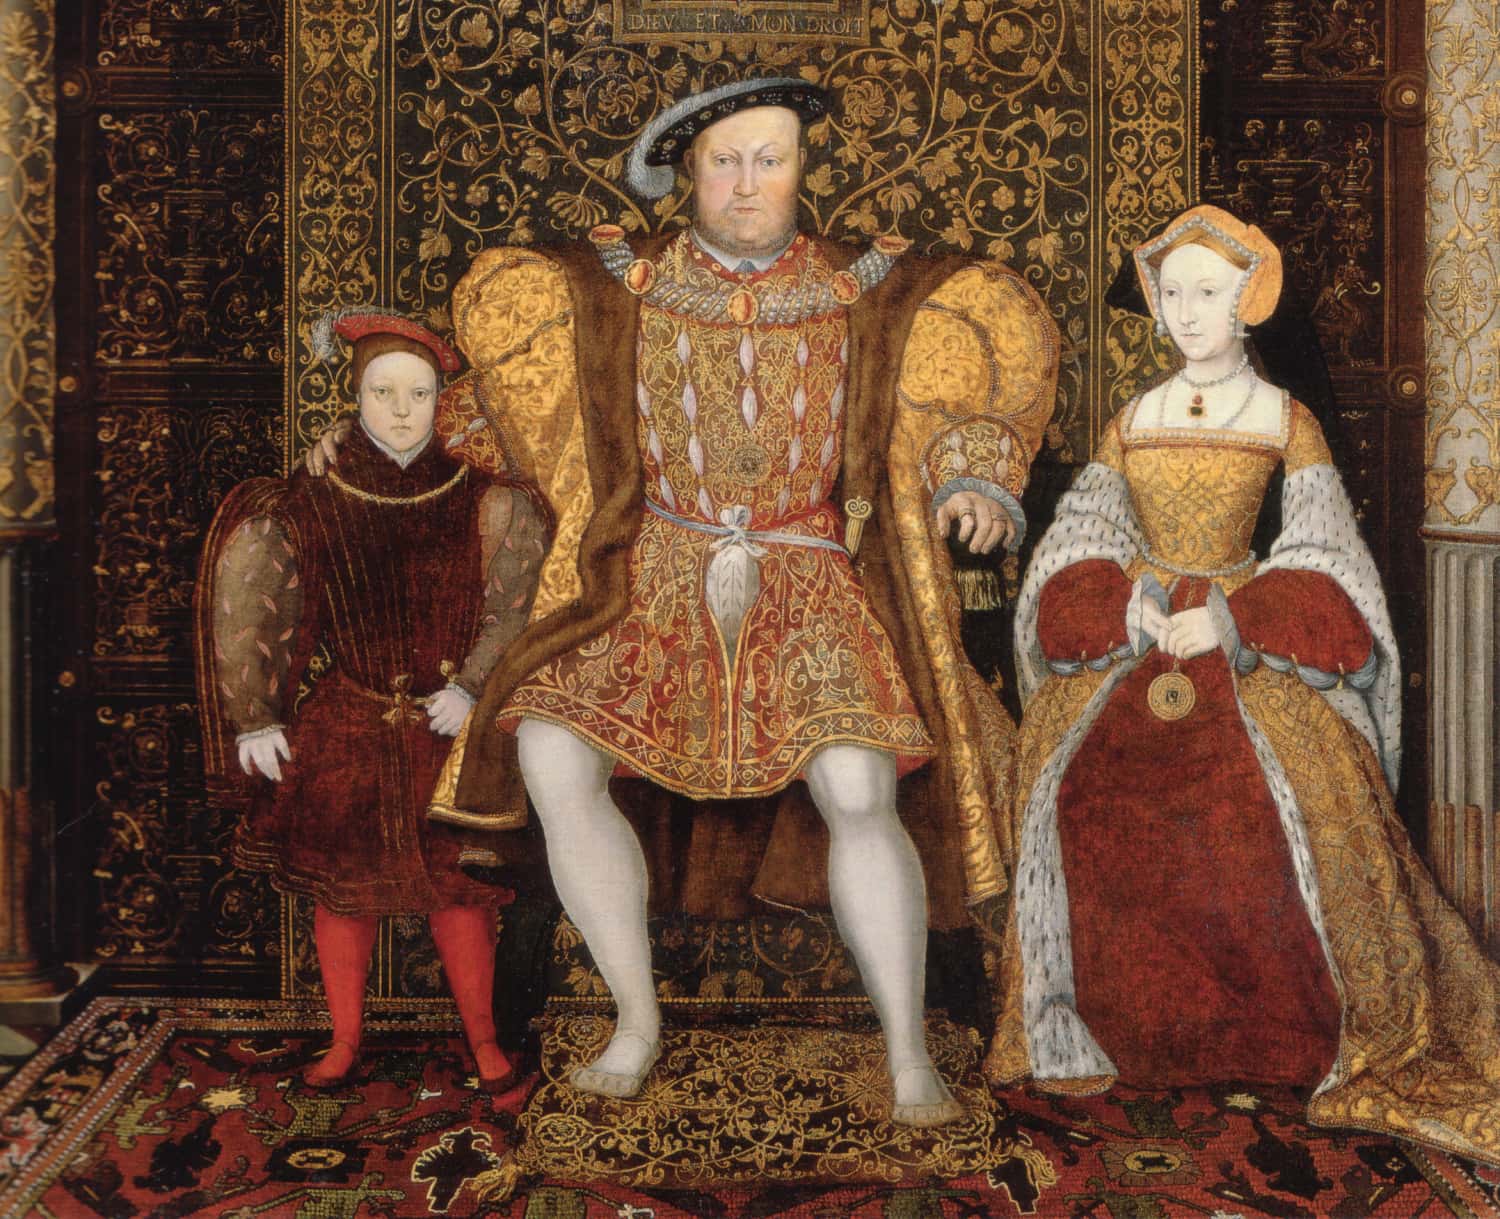 <p>Henry VIII’s thirst for sons made him famous. But he already had a son for most of his early reign—thanks to his lover, Bessie Blount. Henry Fitzroy was the only acknowledged illegitimate child of Henry VIII, although the boy perished at the age of 17. Blount would still be greeted with the refrain, ‘Bless ye, Bessie Blount” for that proving the Henry VIII could produce male babies.</p>